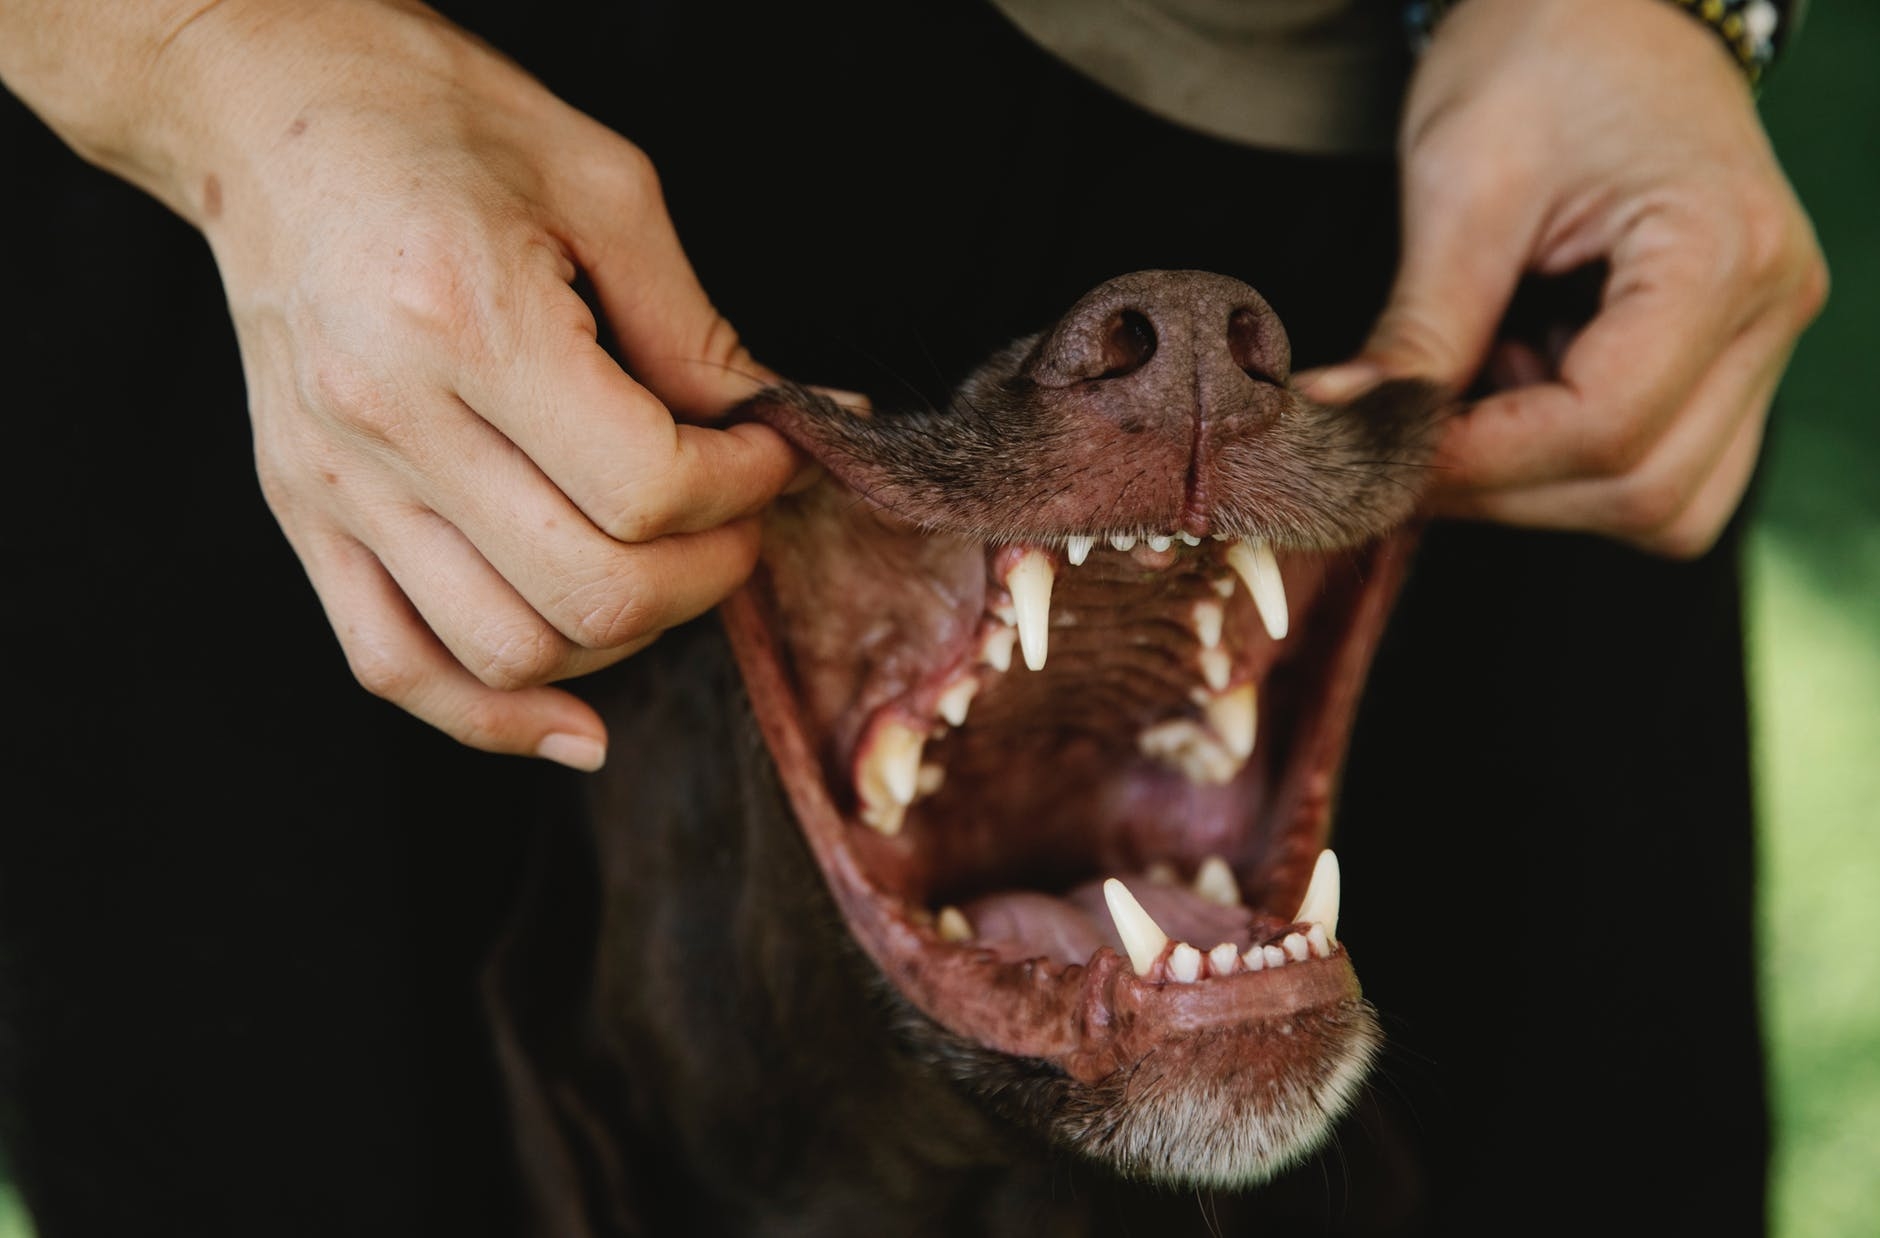 backdrop view of canine teeth